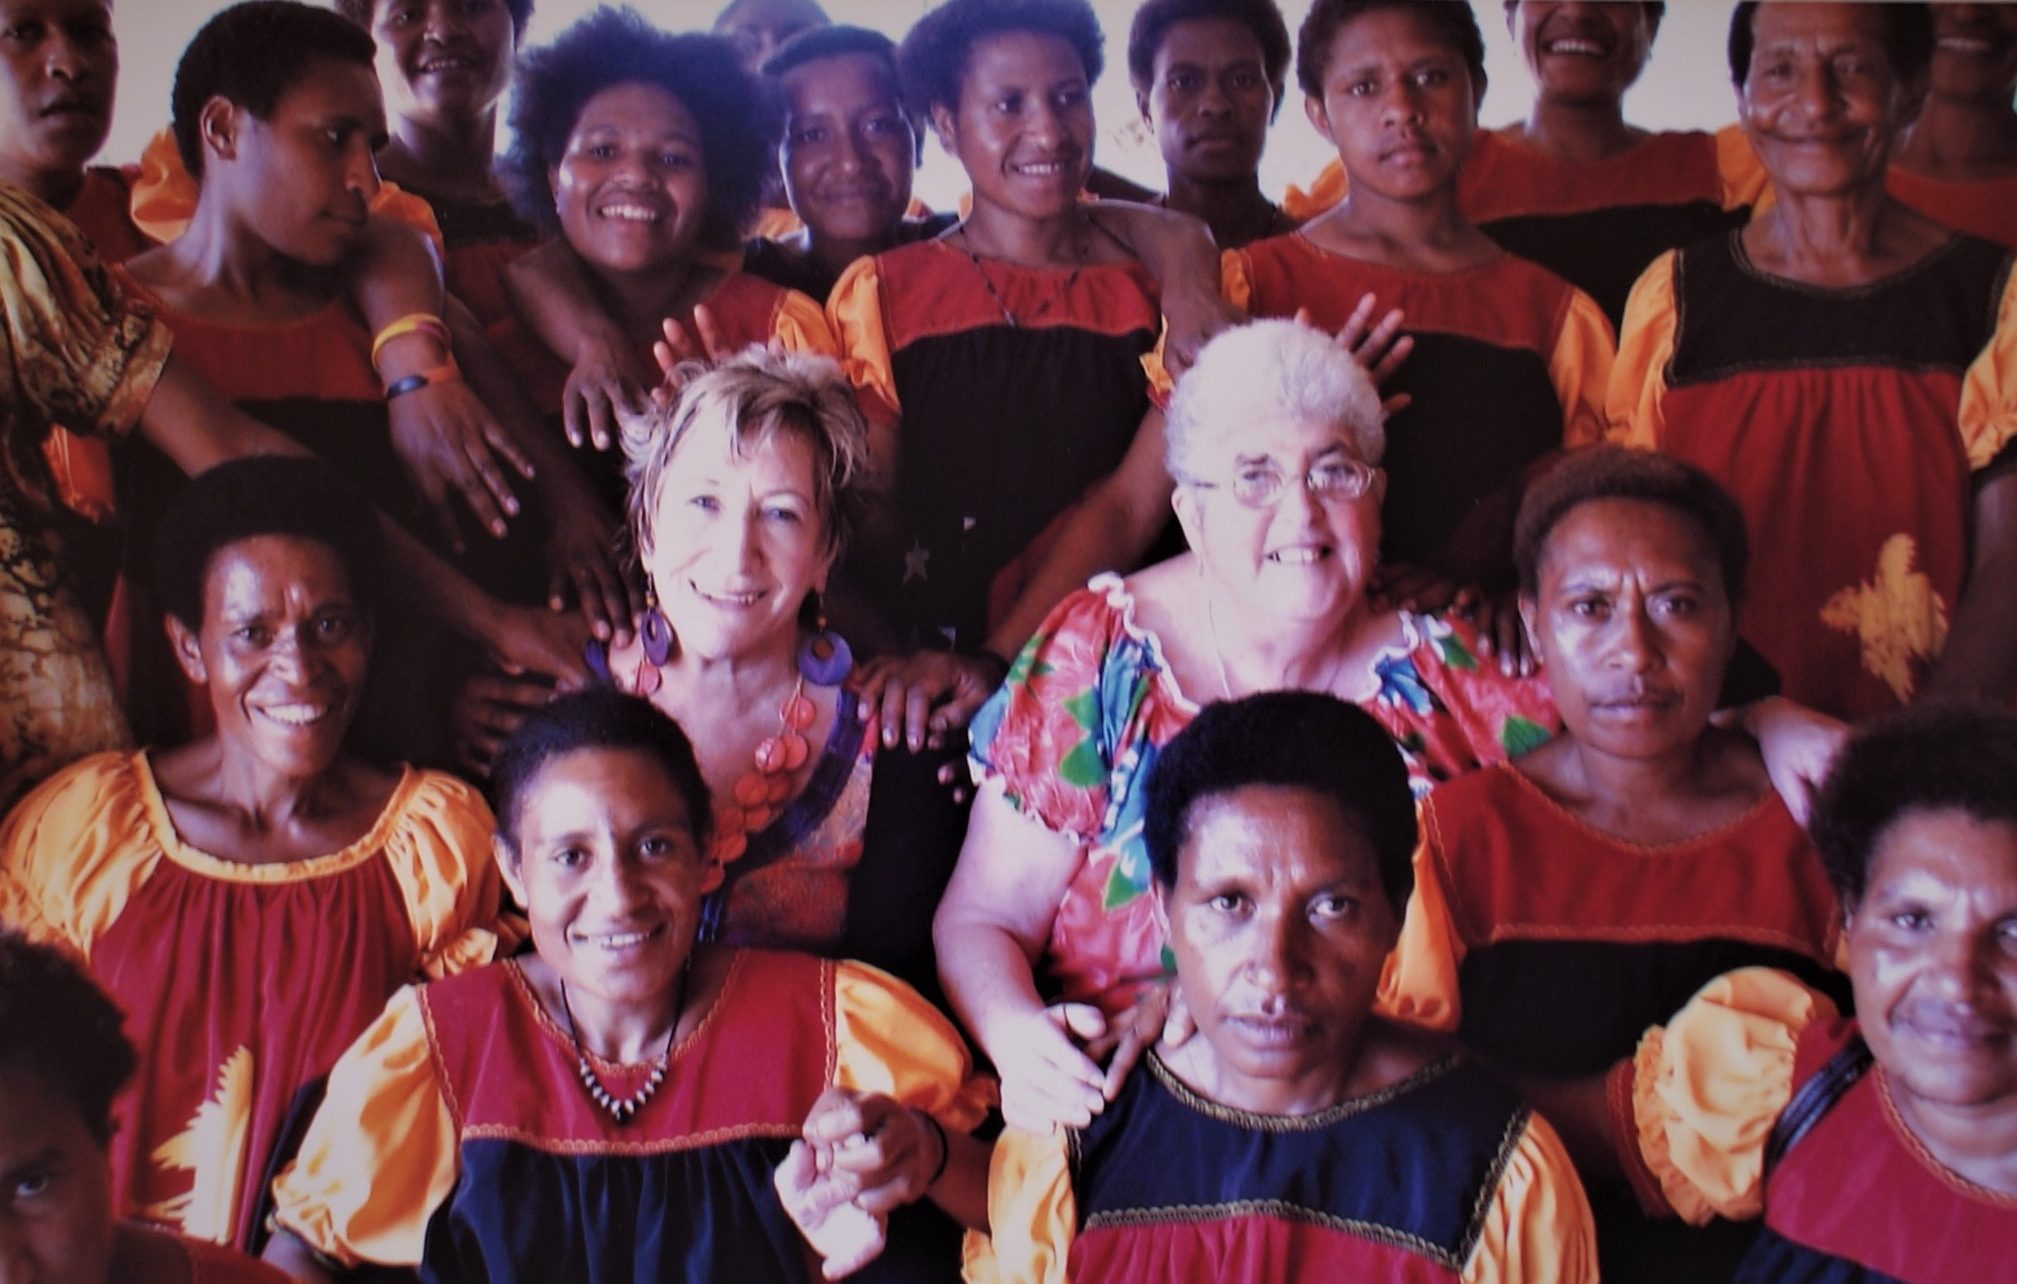 Lesley and a friend are sitting surrounded by a group of about 15 Fijian women.